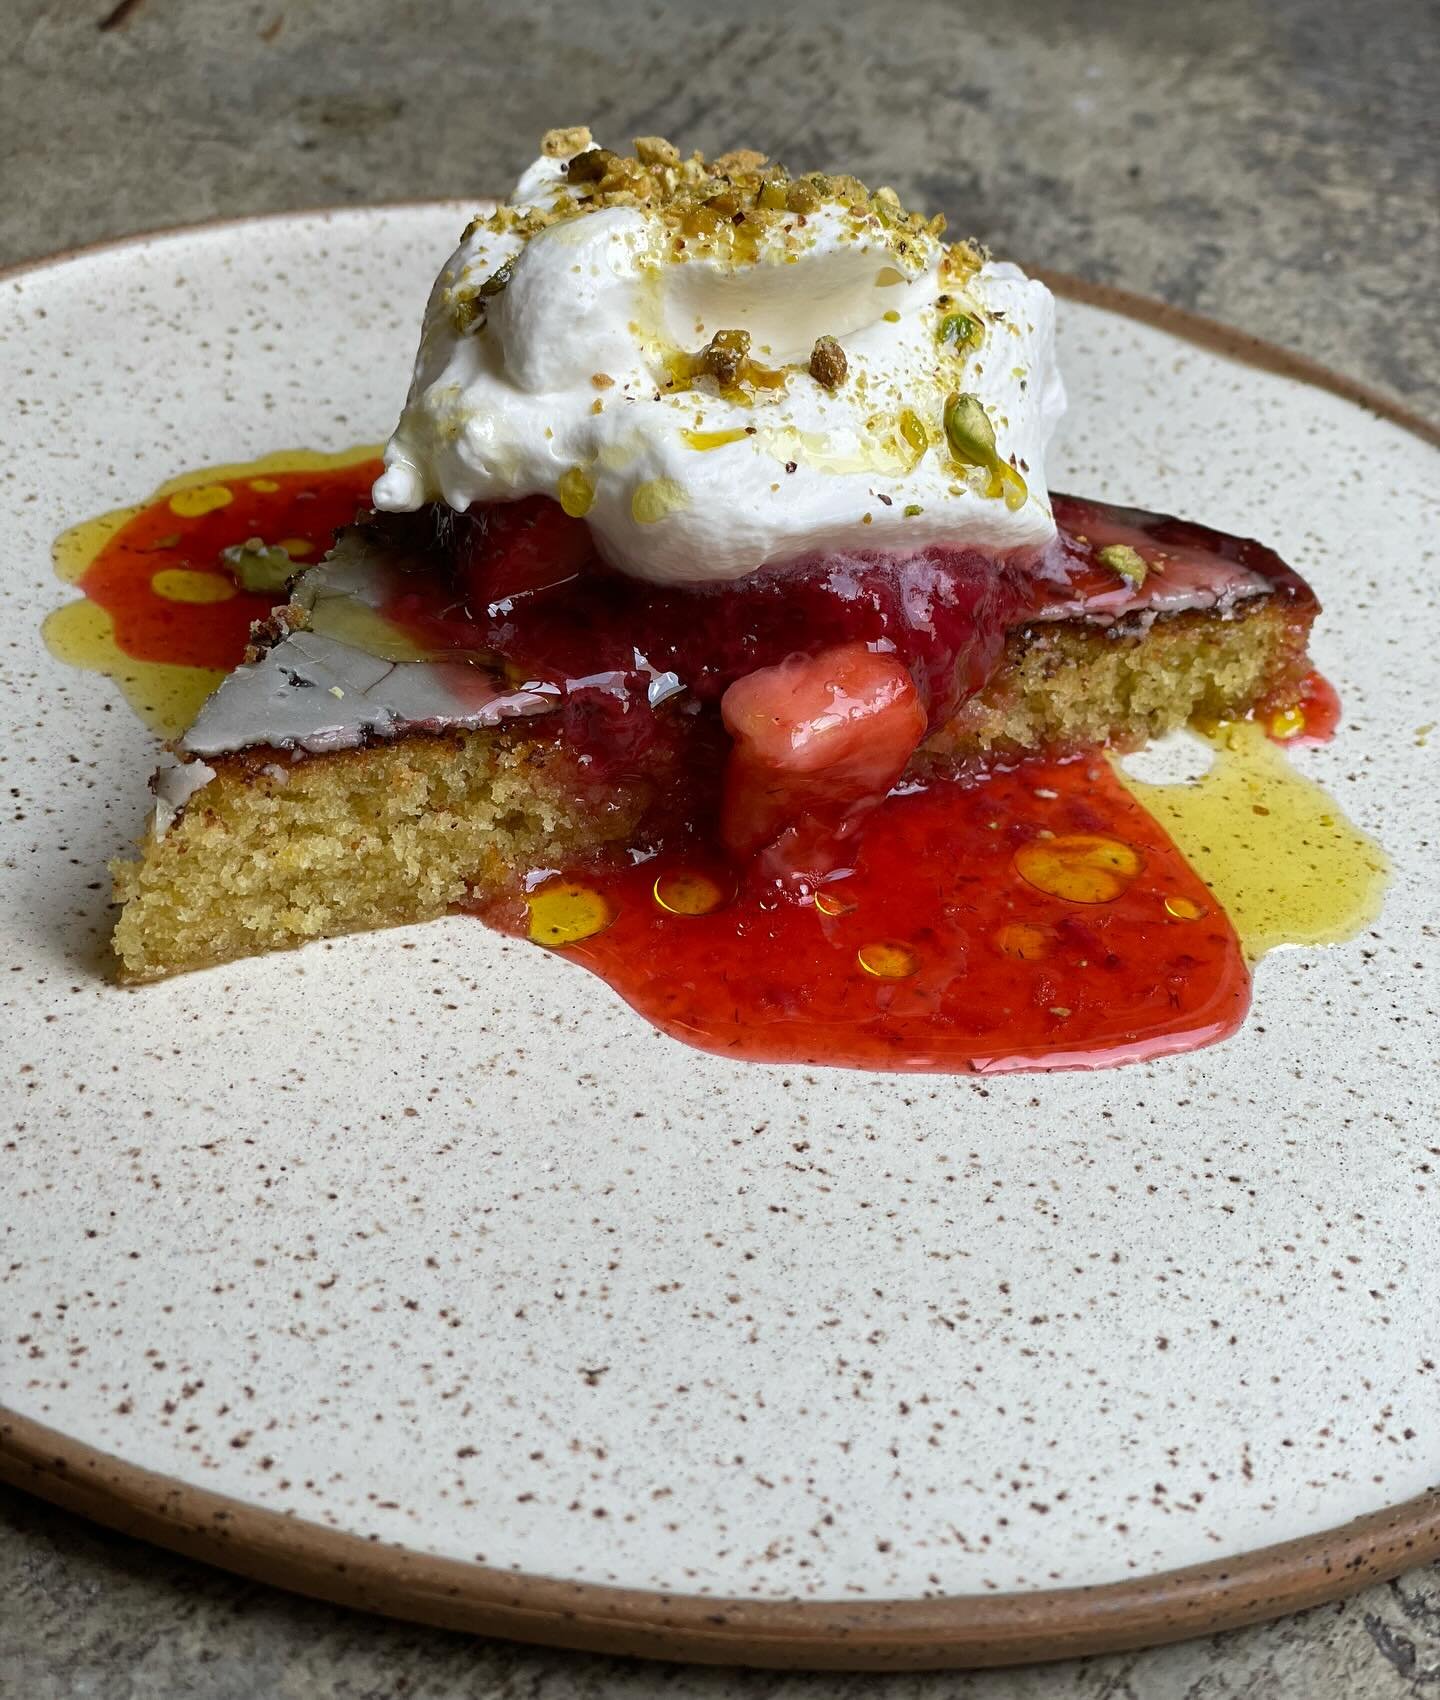 Olive Oil Cake is back.  Accept not substitutes.  We made a lot because we know you have missed it.  We&rsquo;ll see you soon.

Olive Oil Cake - strawberry, orange blossom, honey whip, pistachio